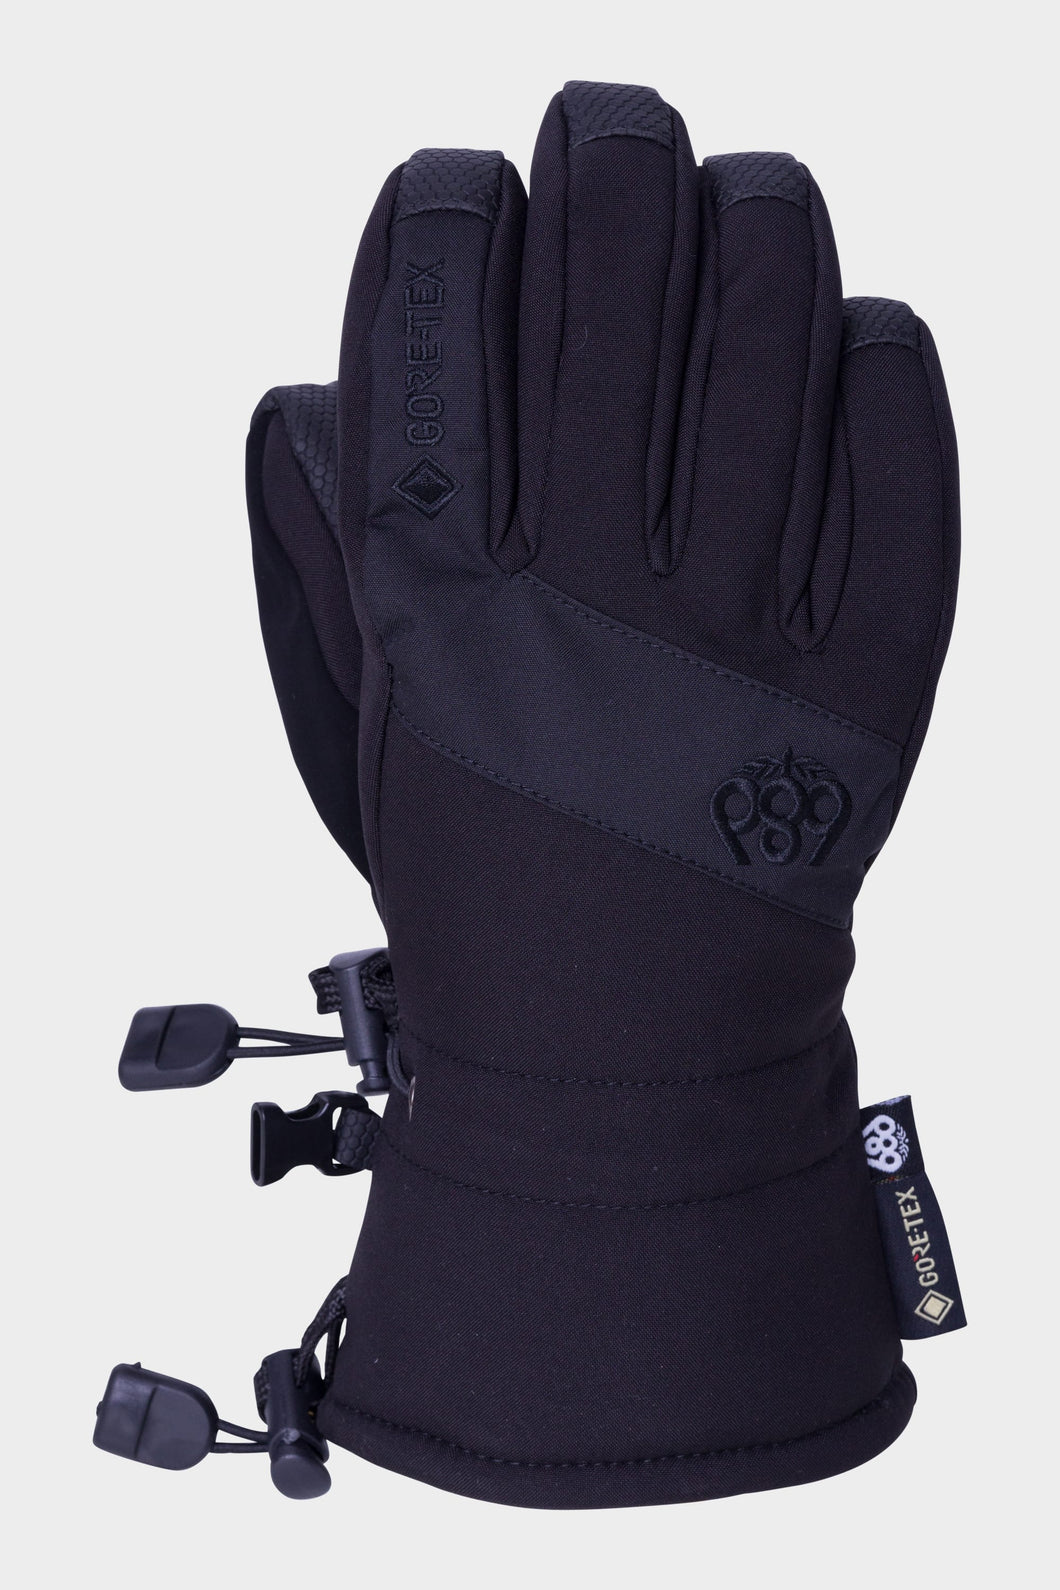 686 GORE-TEX LINEAR YOUTH GLOVE